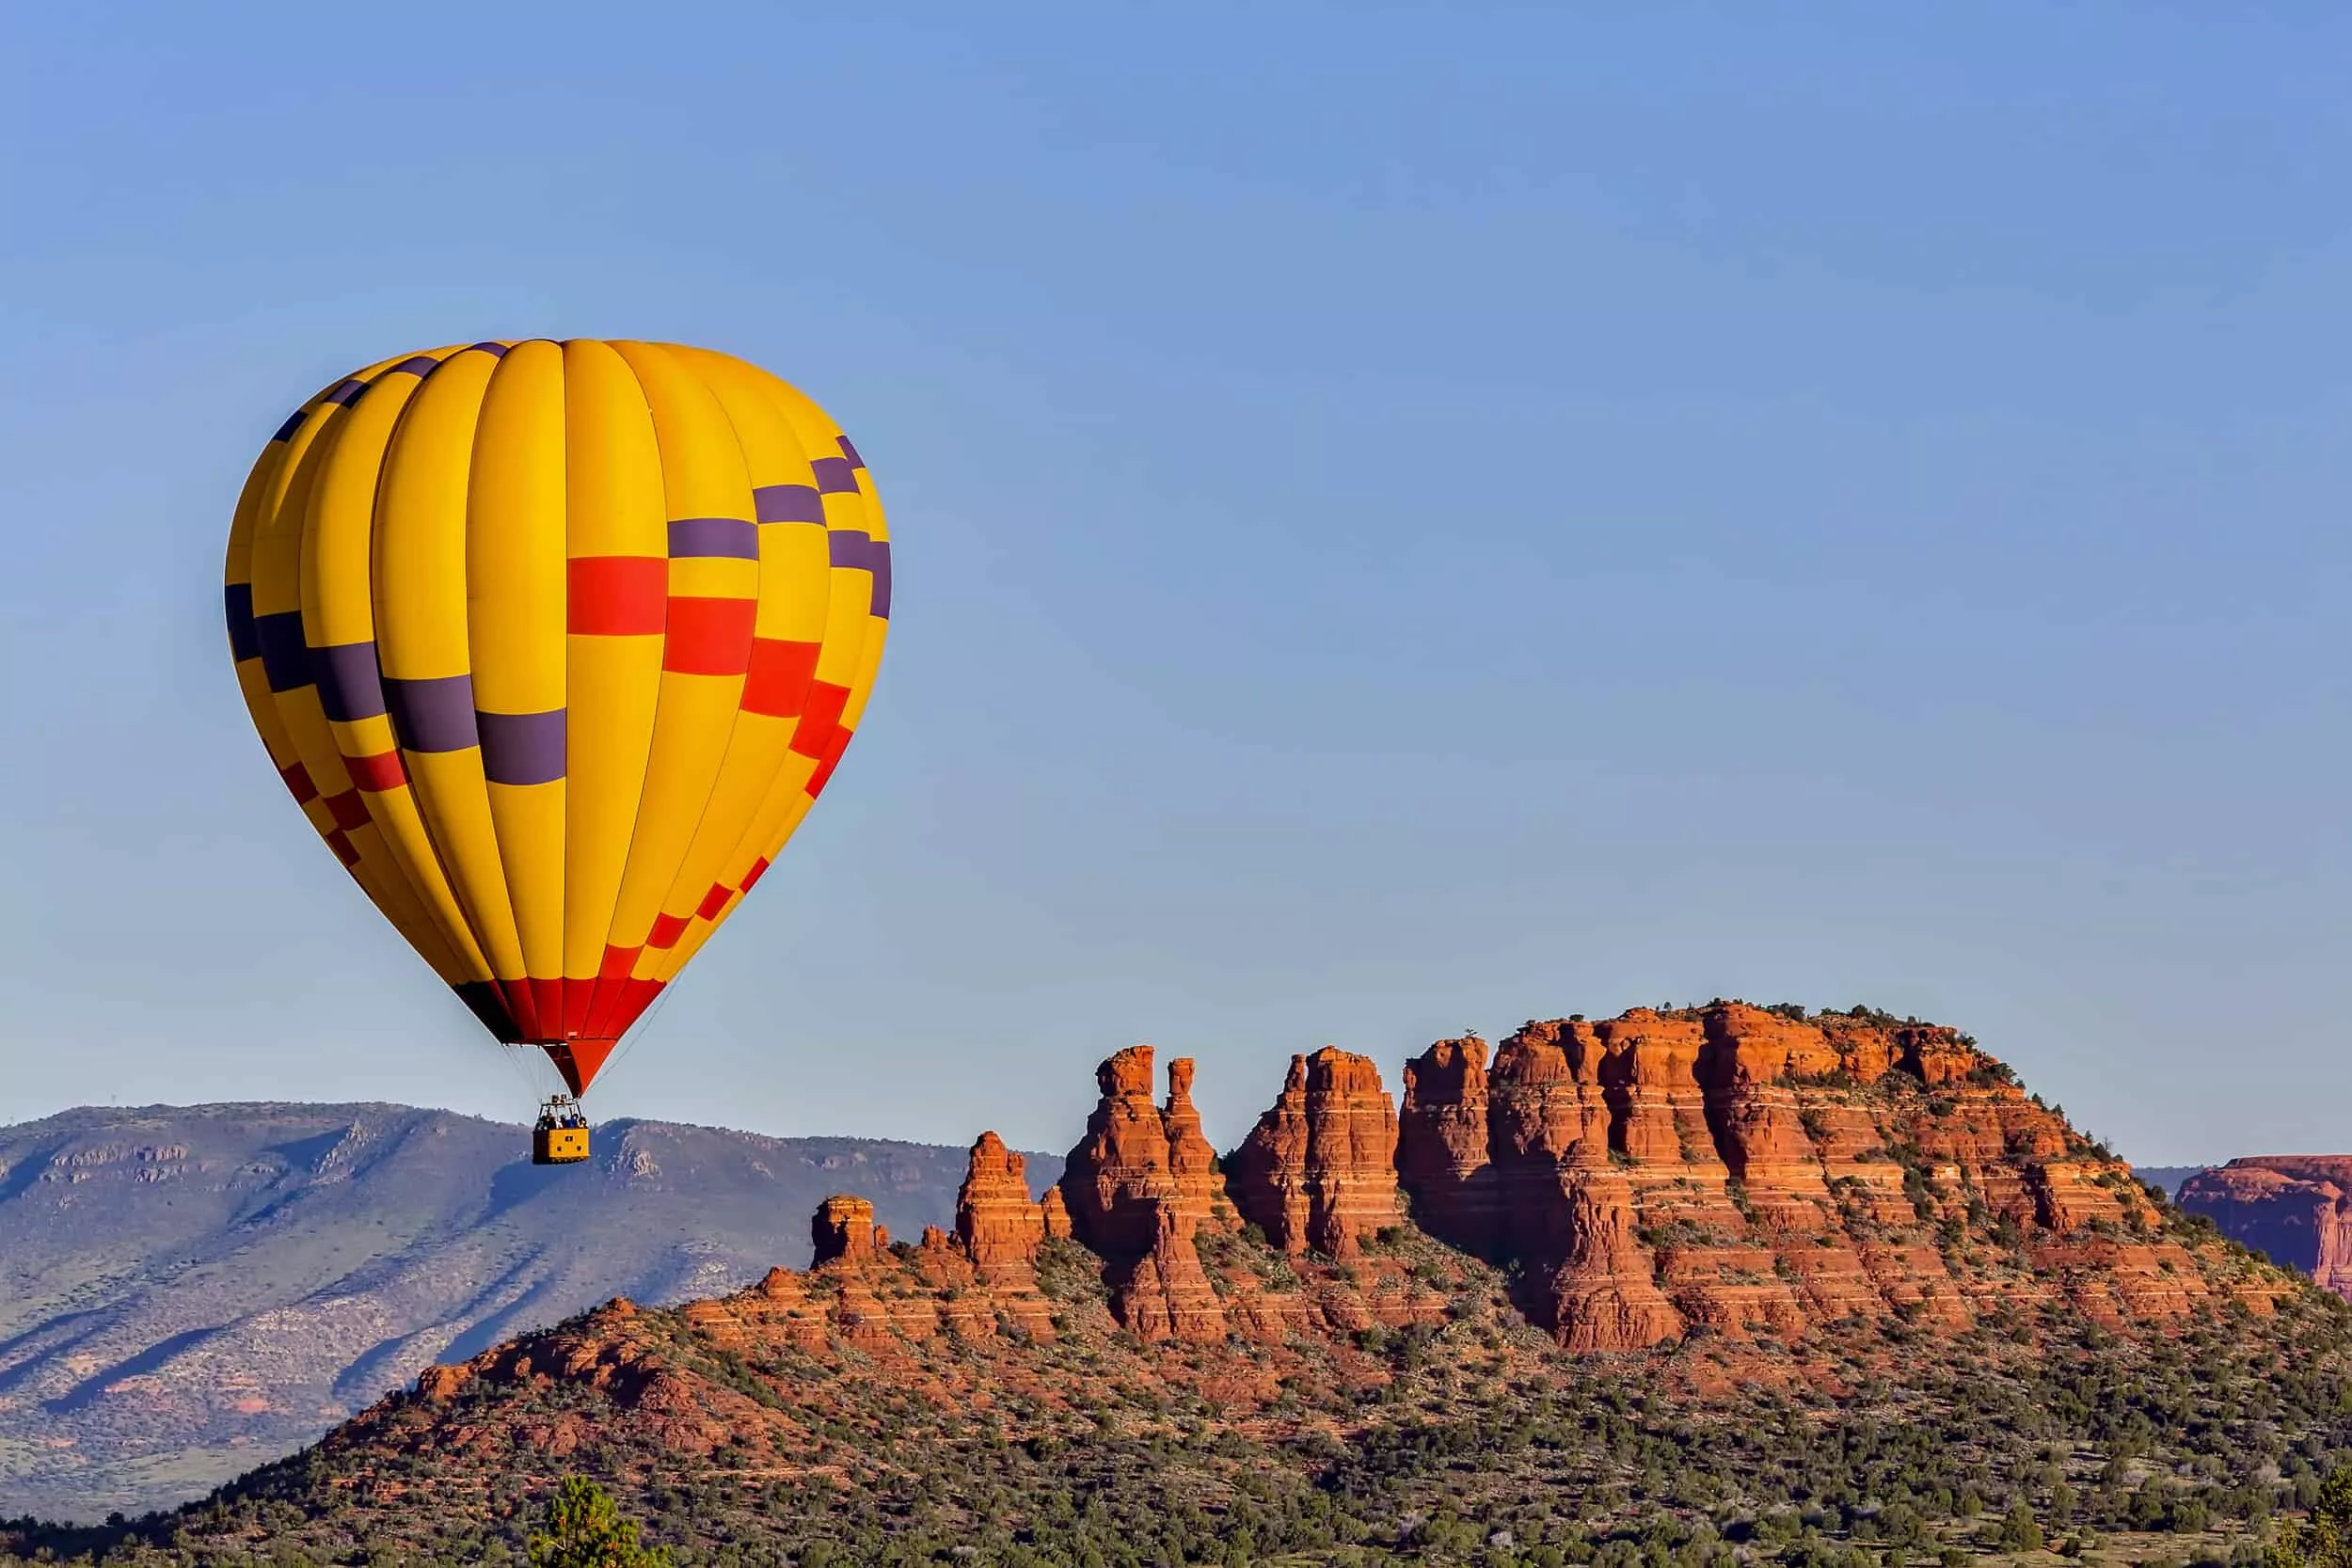 Red Rock Balloons in USA, North America | Hot Air Ballooning - Rated 1.2